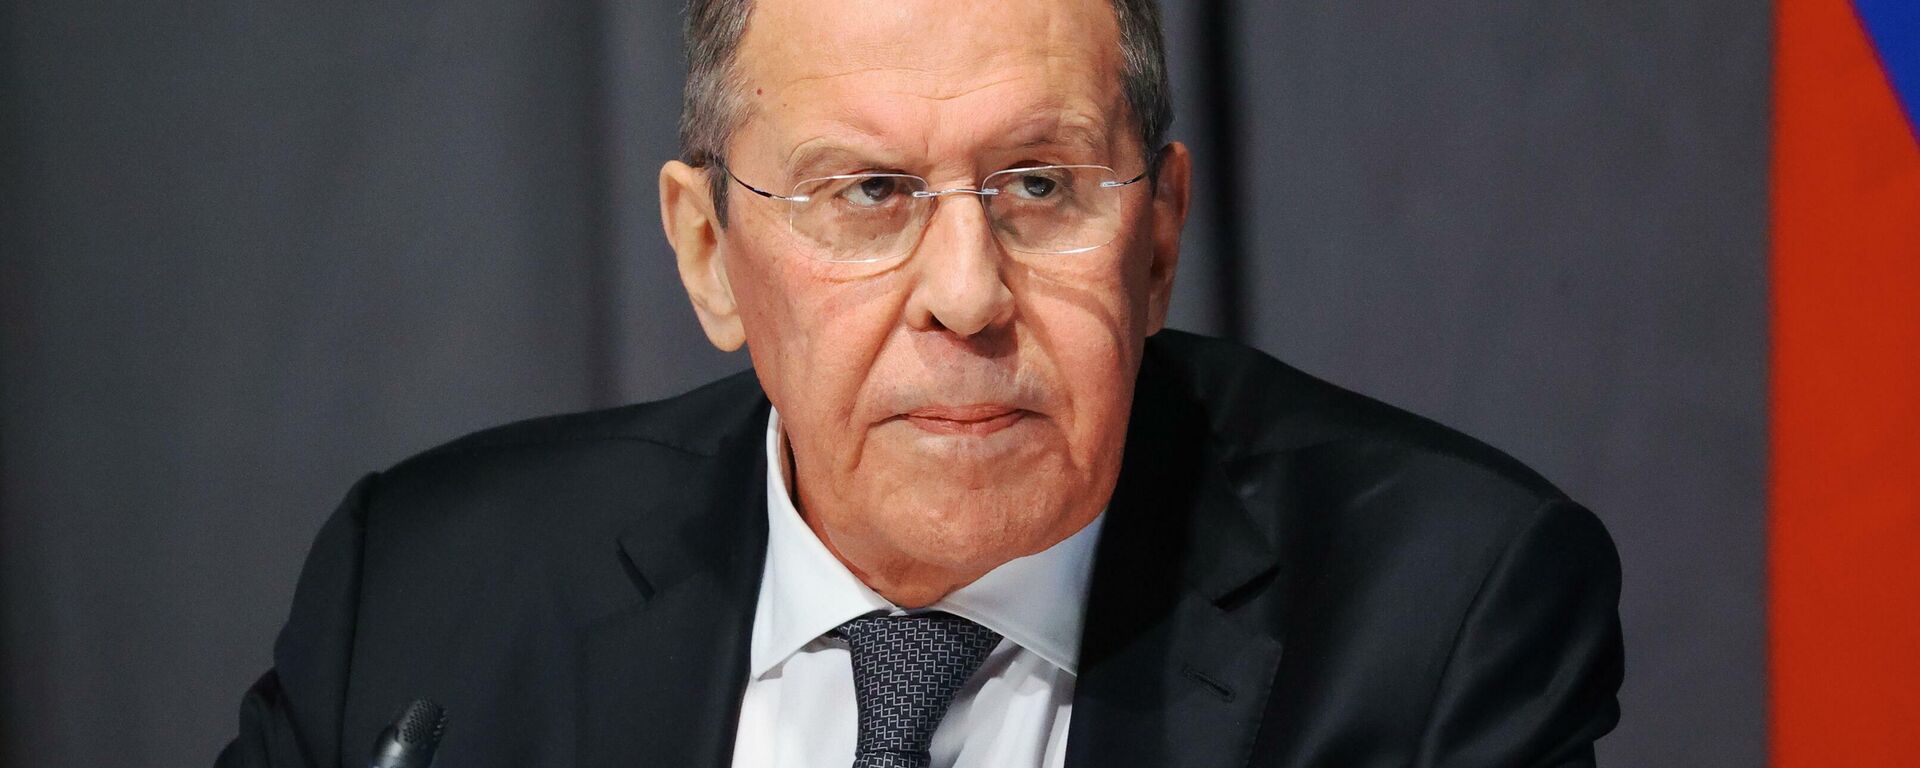 Russian Foreign Minister Lavrov Gives Statement on US Response to Moscow Security Proposals - Sputnik International, 1920, 27.01.2022